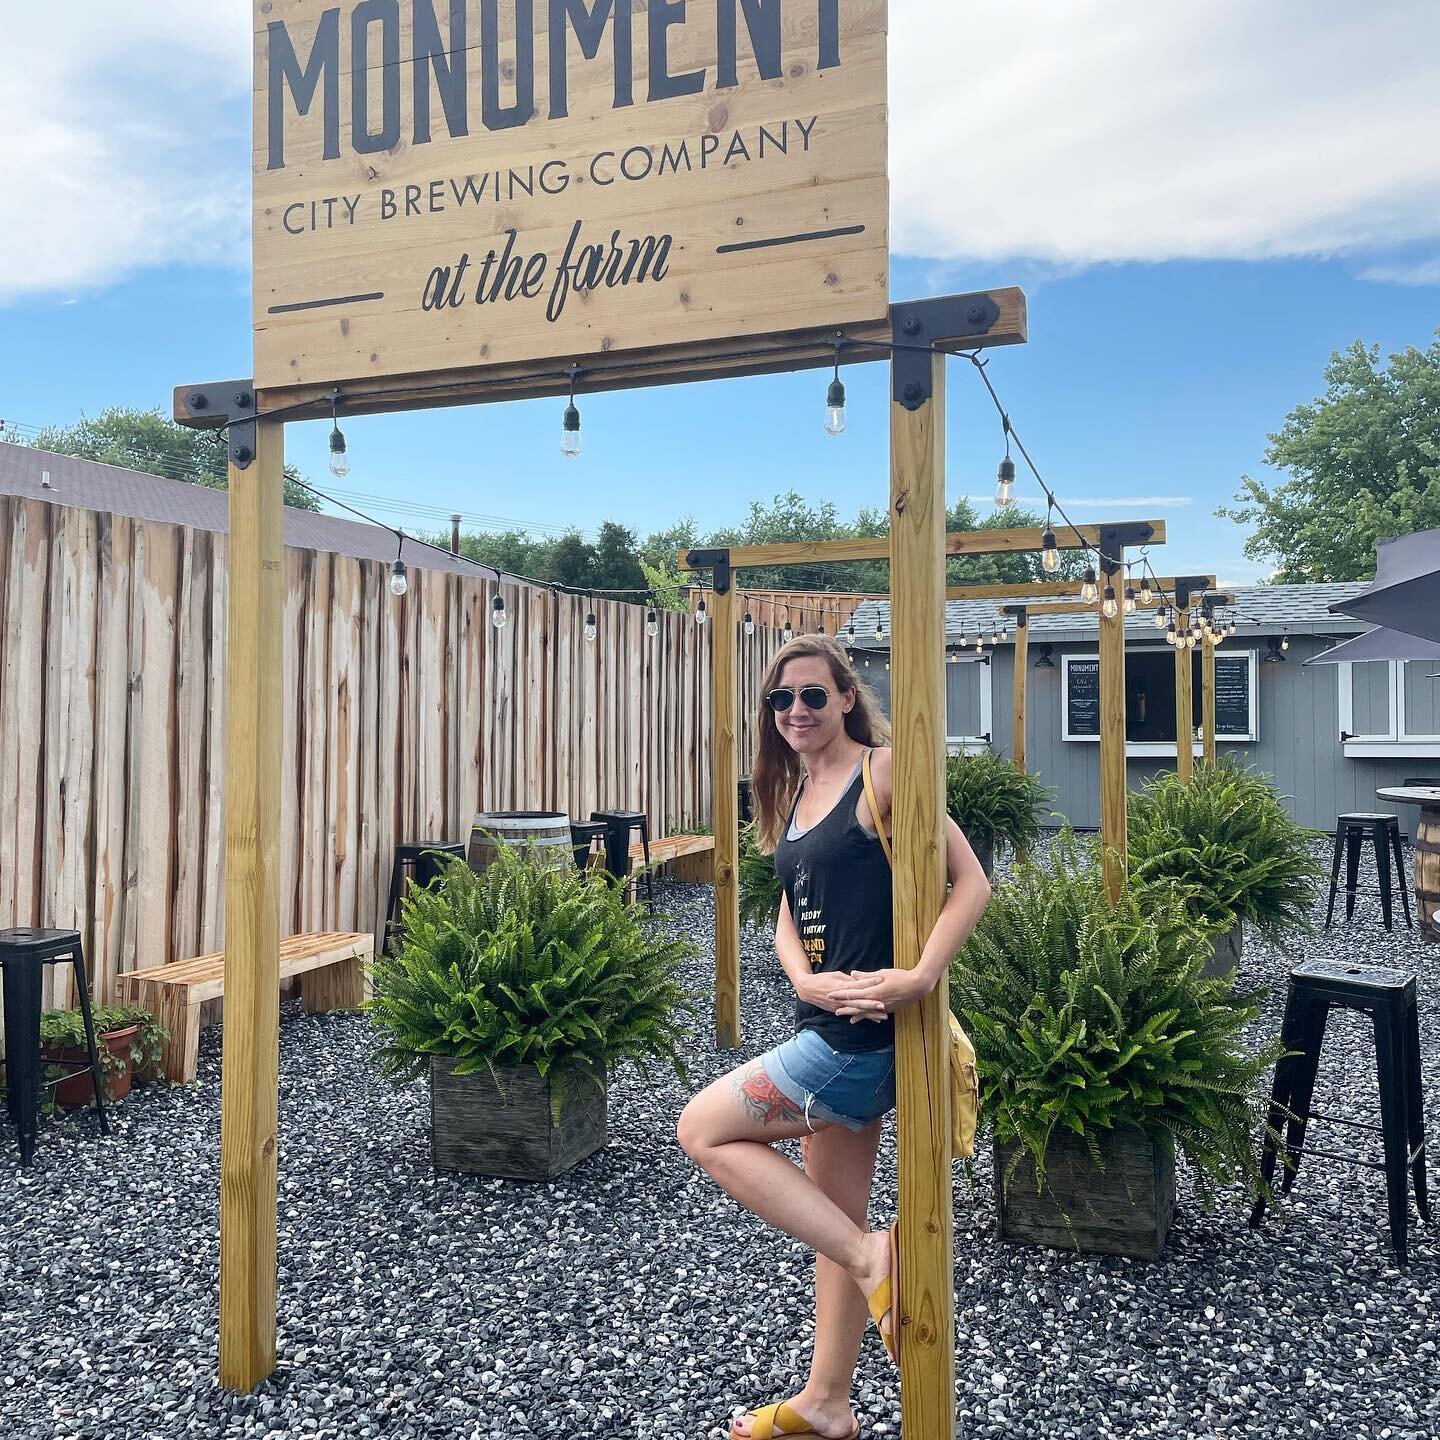 Have you been to Monument&rsquo;s Farm location yet? I got out and about and stopped in today to check out the newly installed sign and grab some fresh cans! 🤟🏻🛹 It&rsquo;s beyond rewarding to see your art in person! 😍 Gah! The sign looks so good